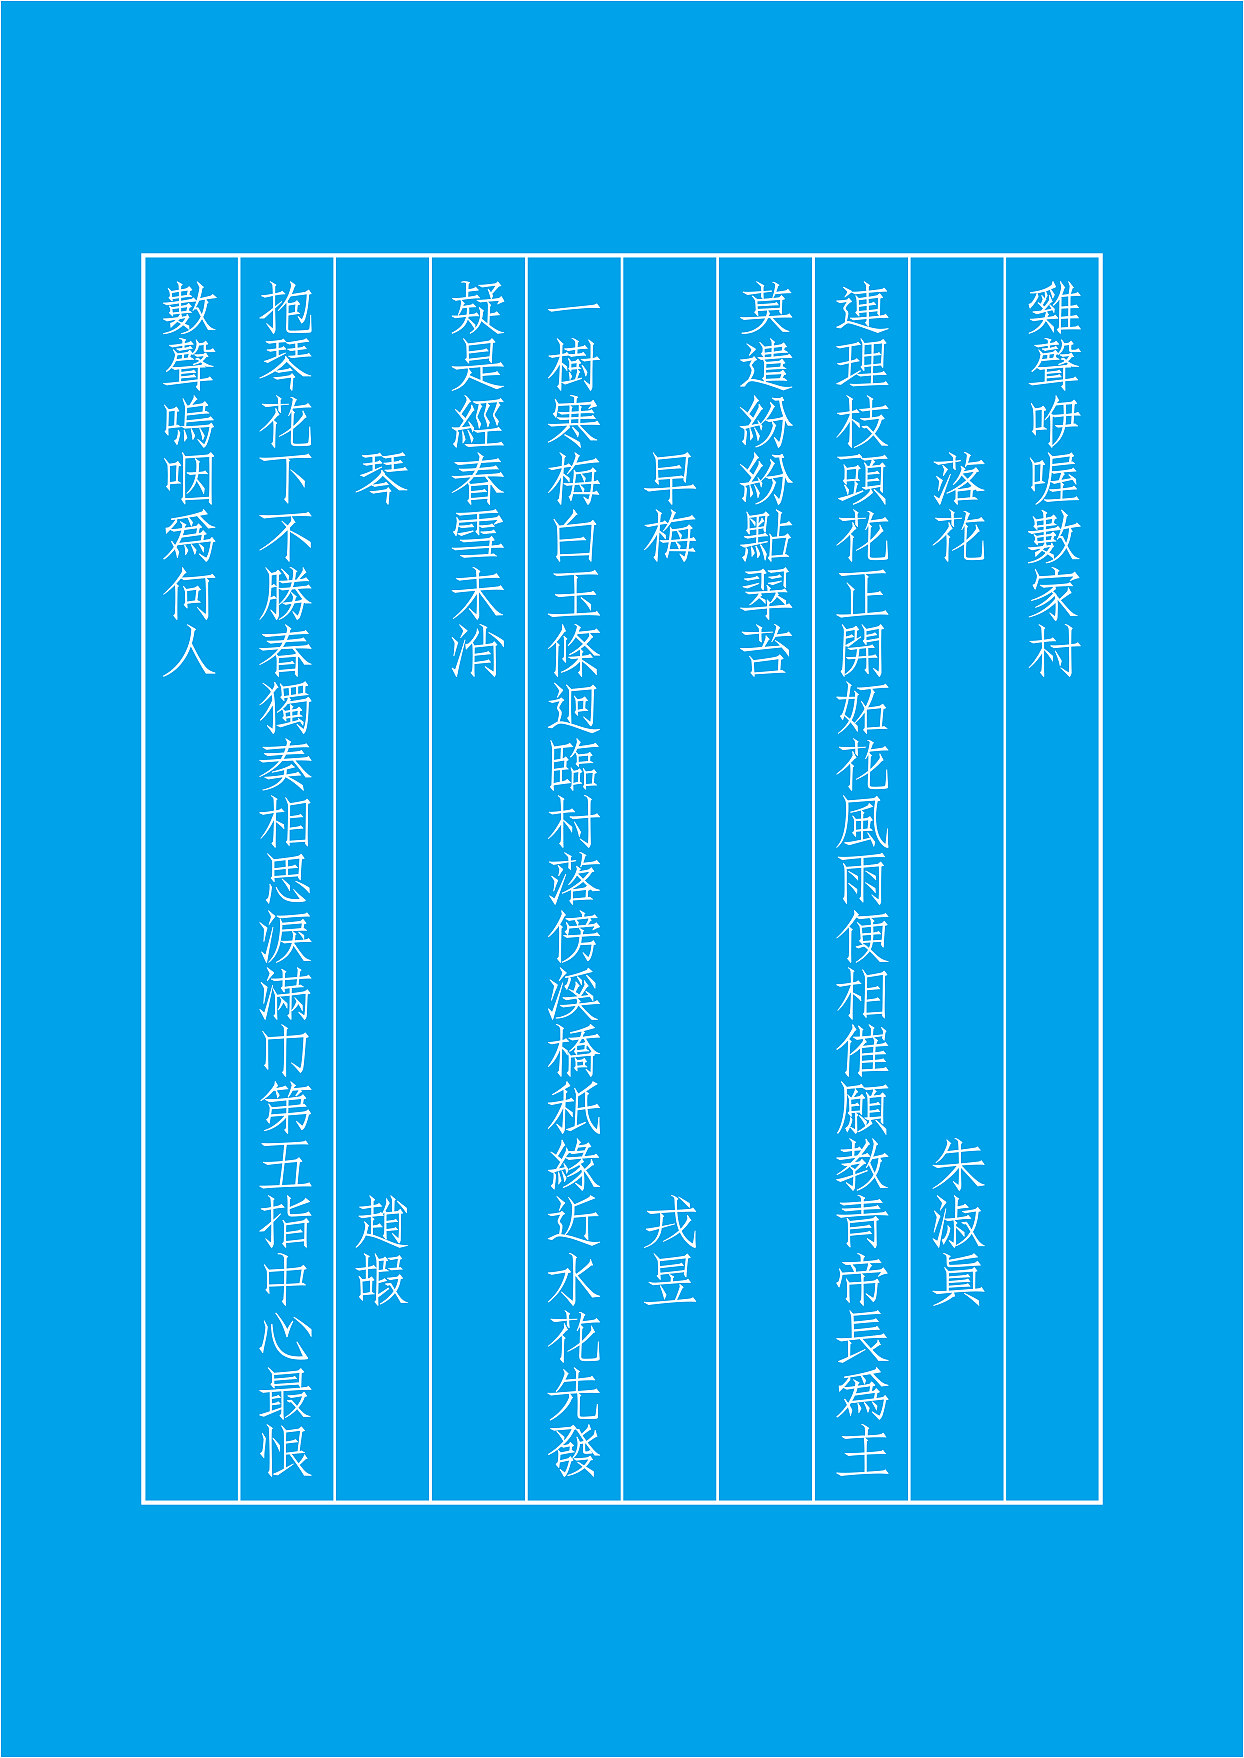 Chinese Creative Font Design-Featured Song-like fonts